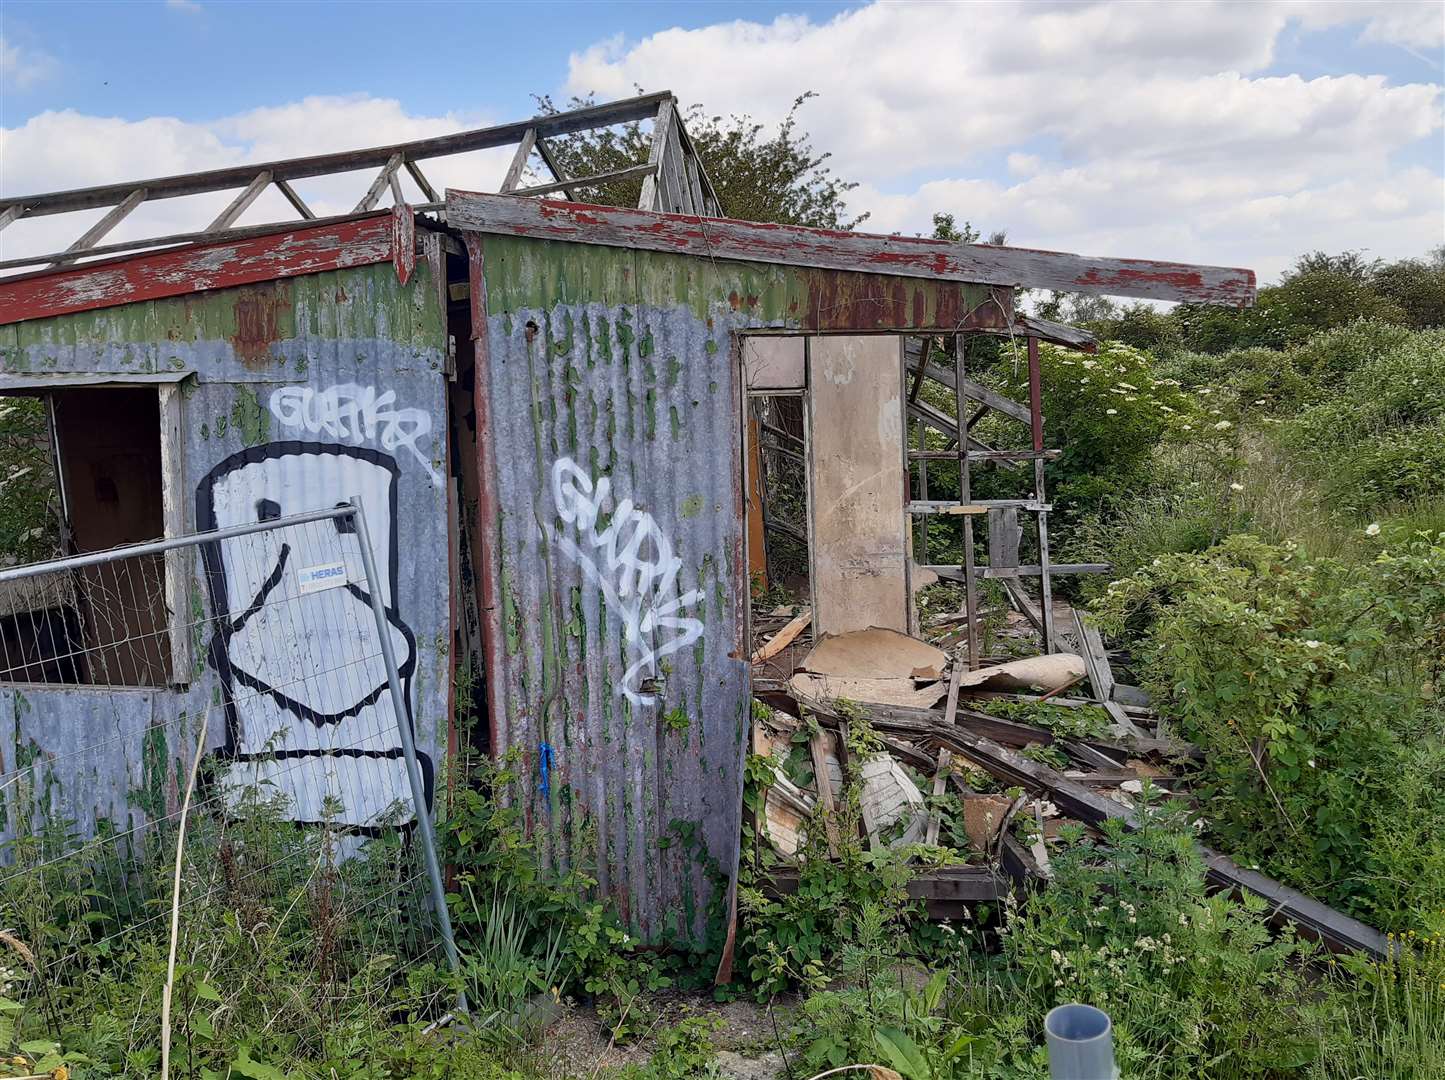 Many of the sheds are in a poor and derelict state